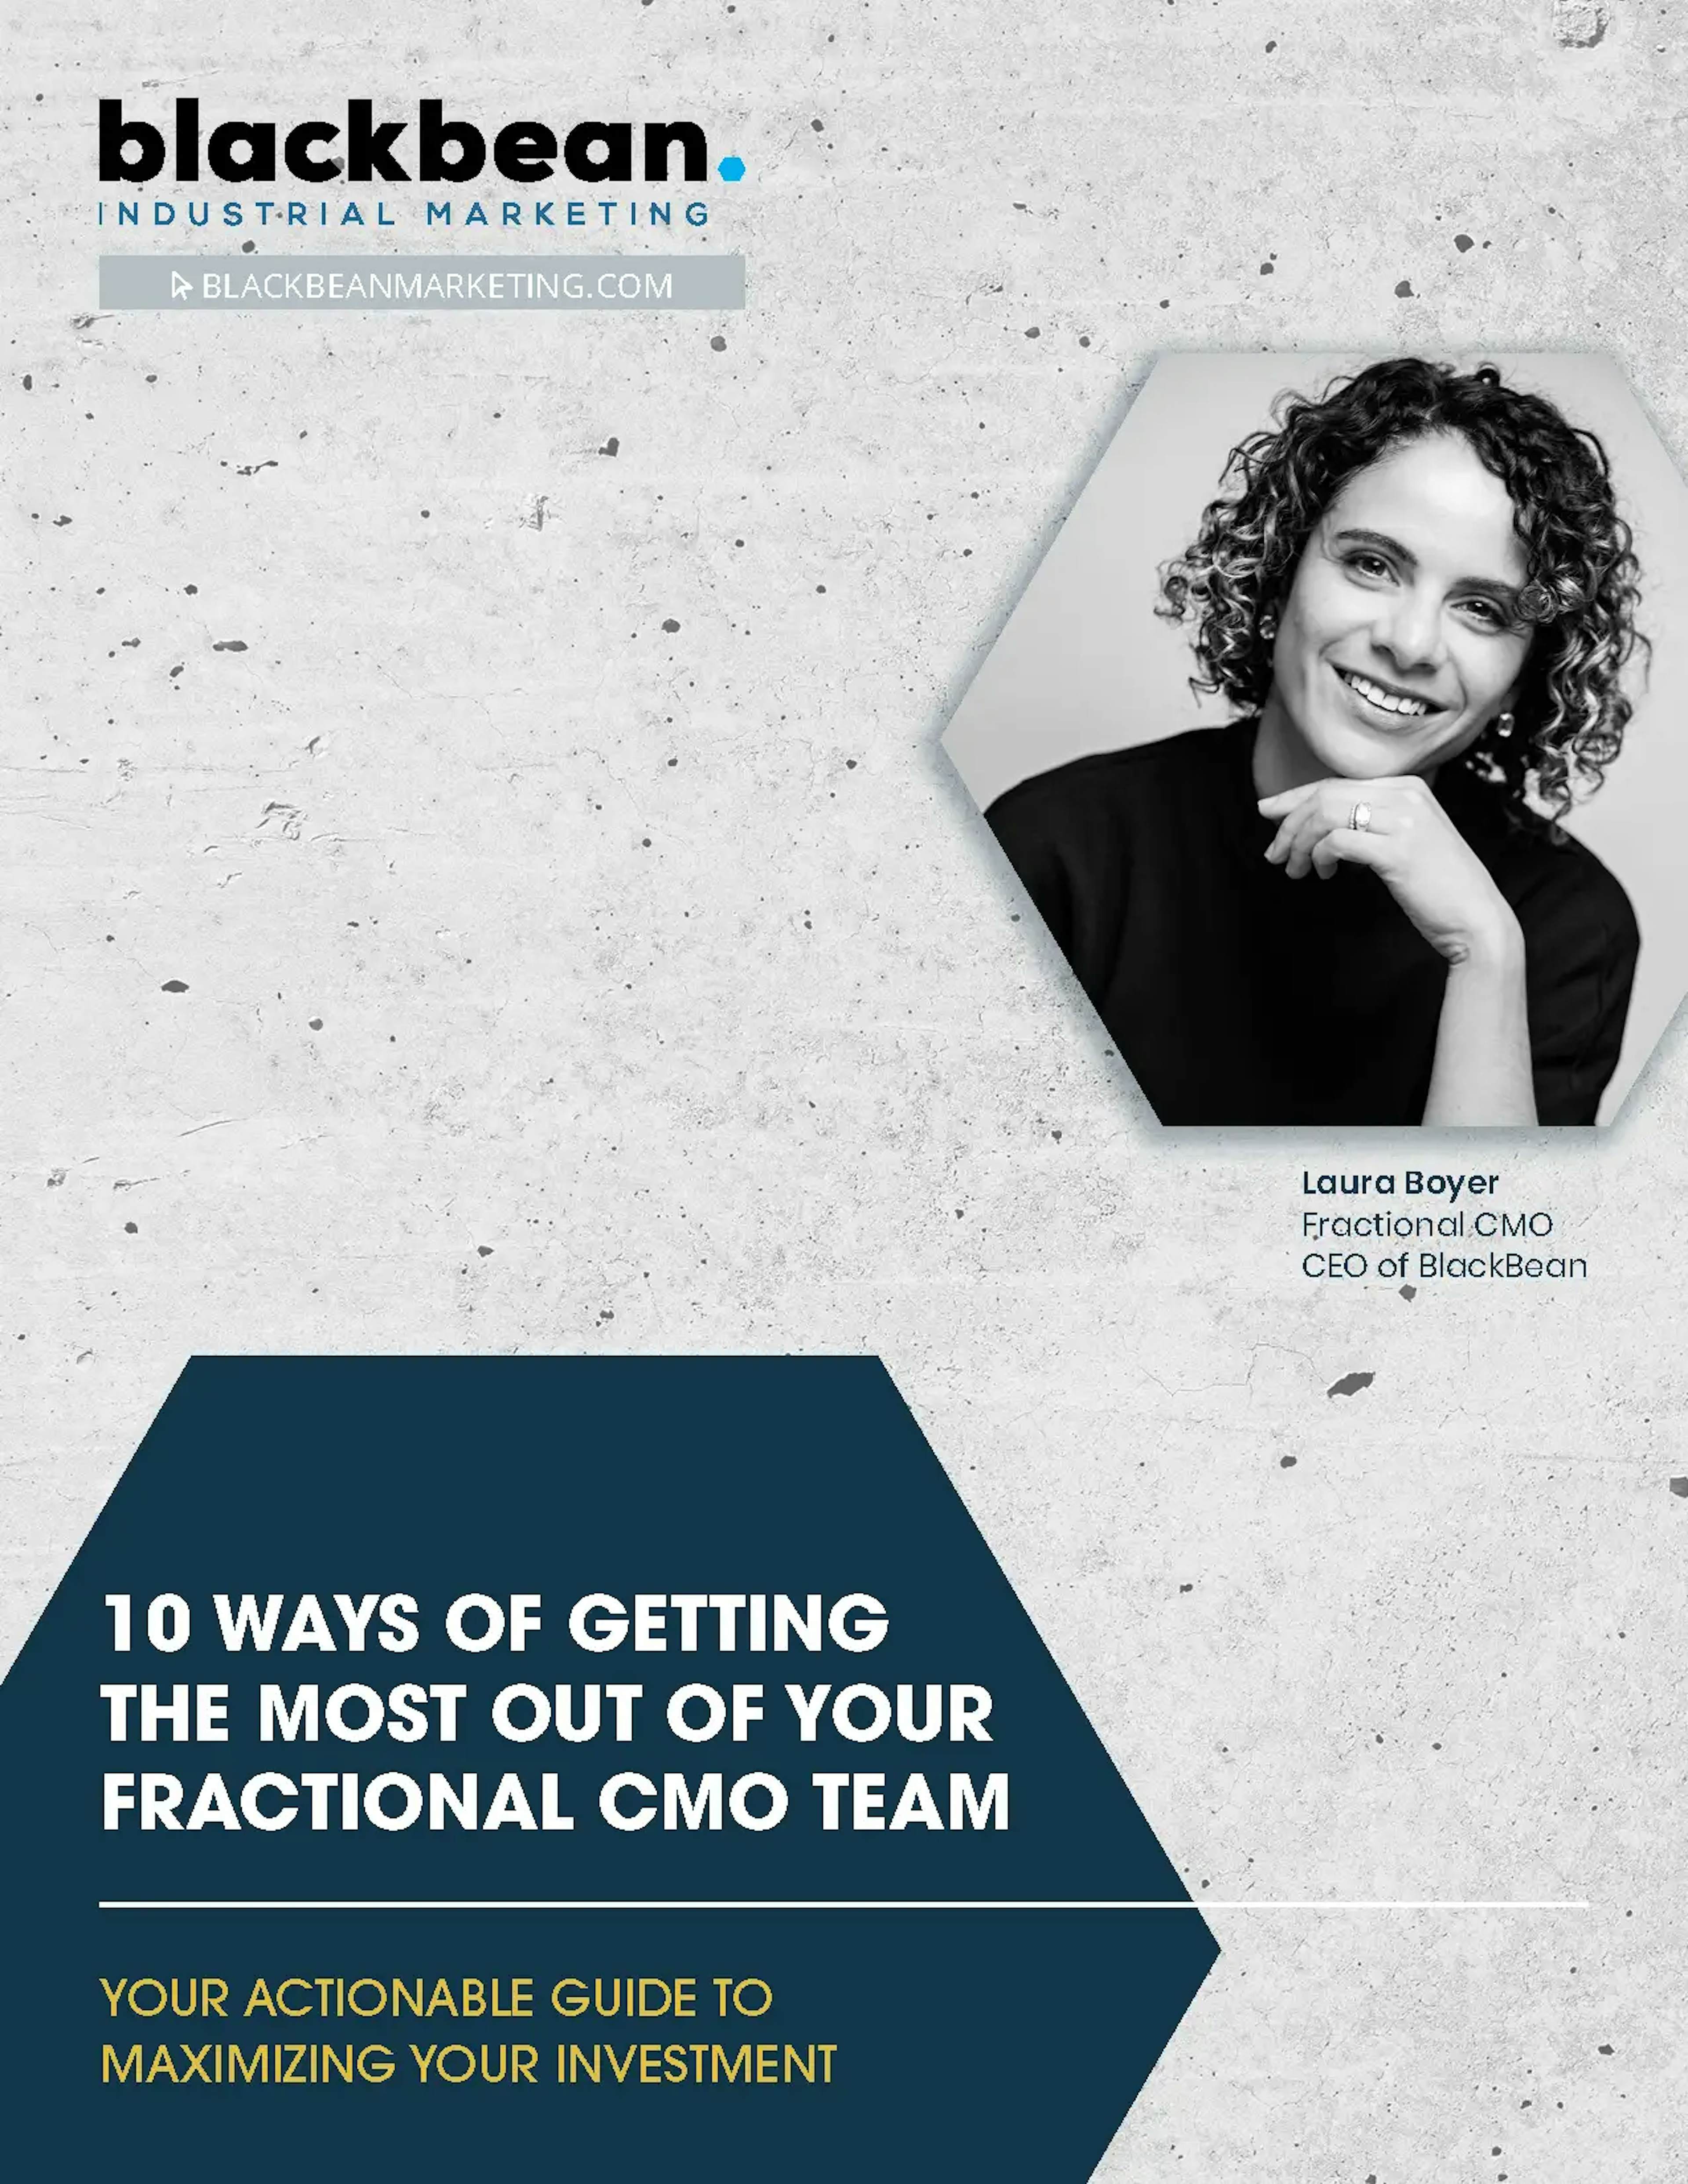 Get 10 expert tips to get the most out of your fractional CMO!